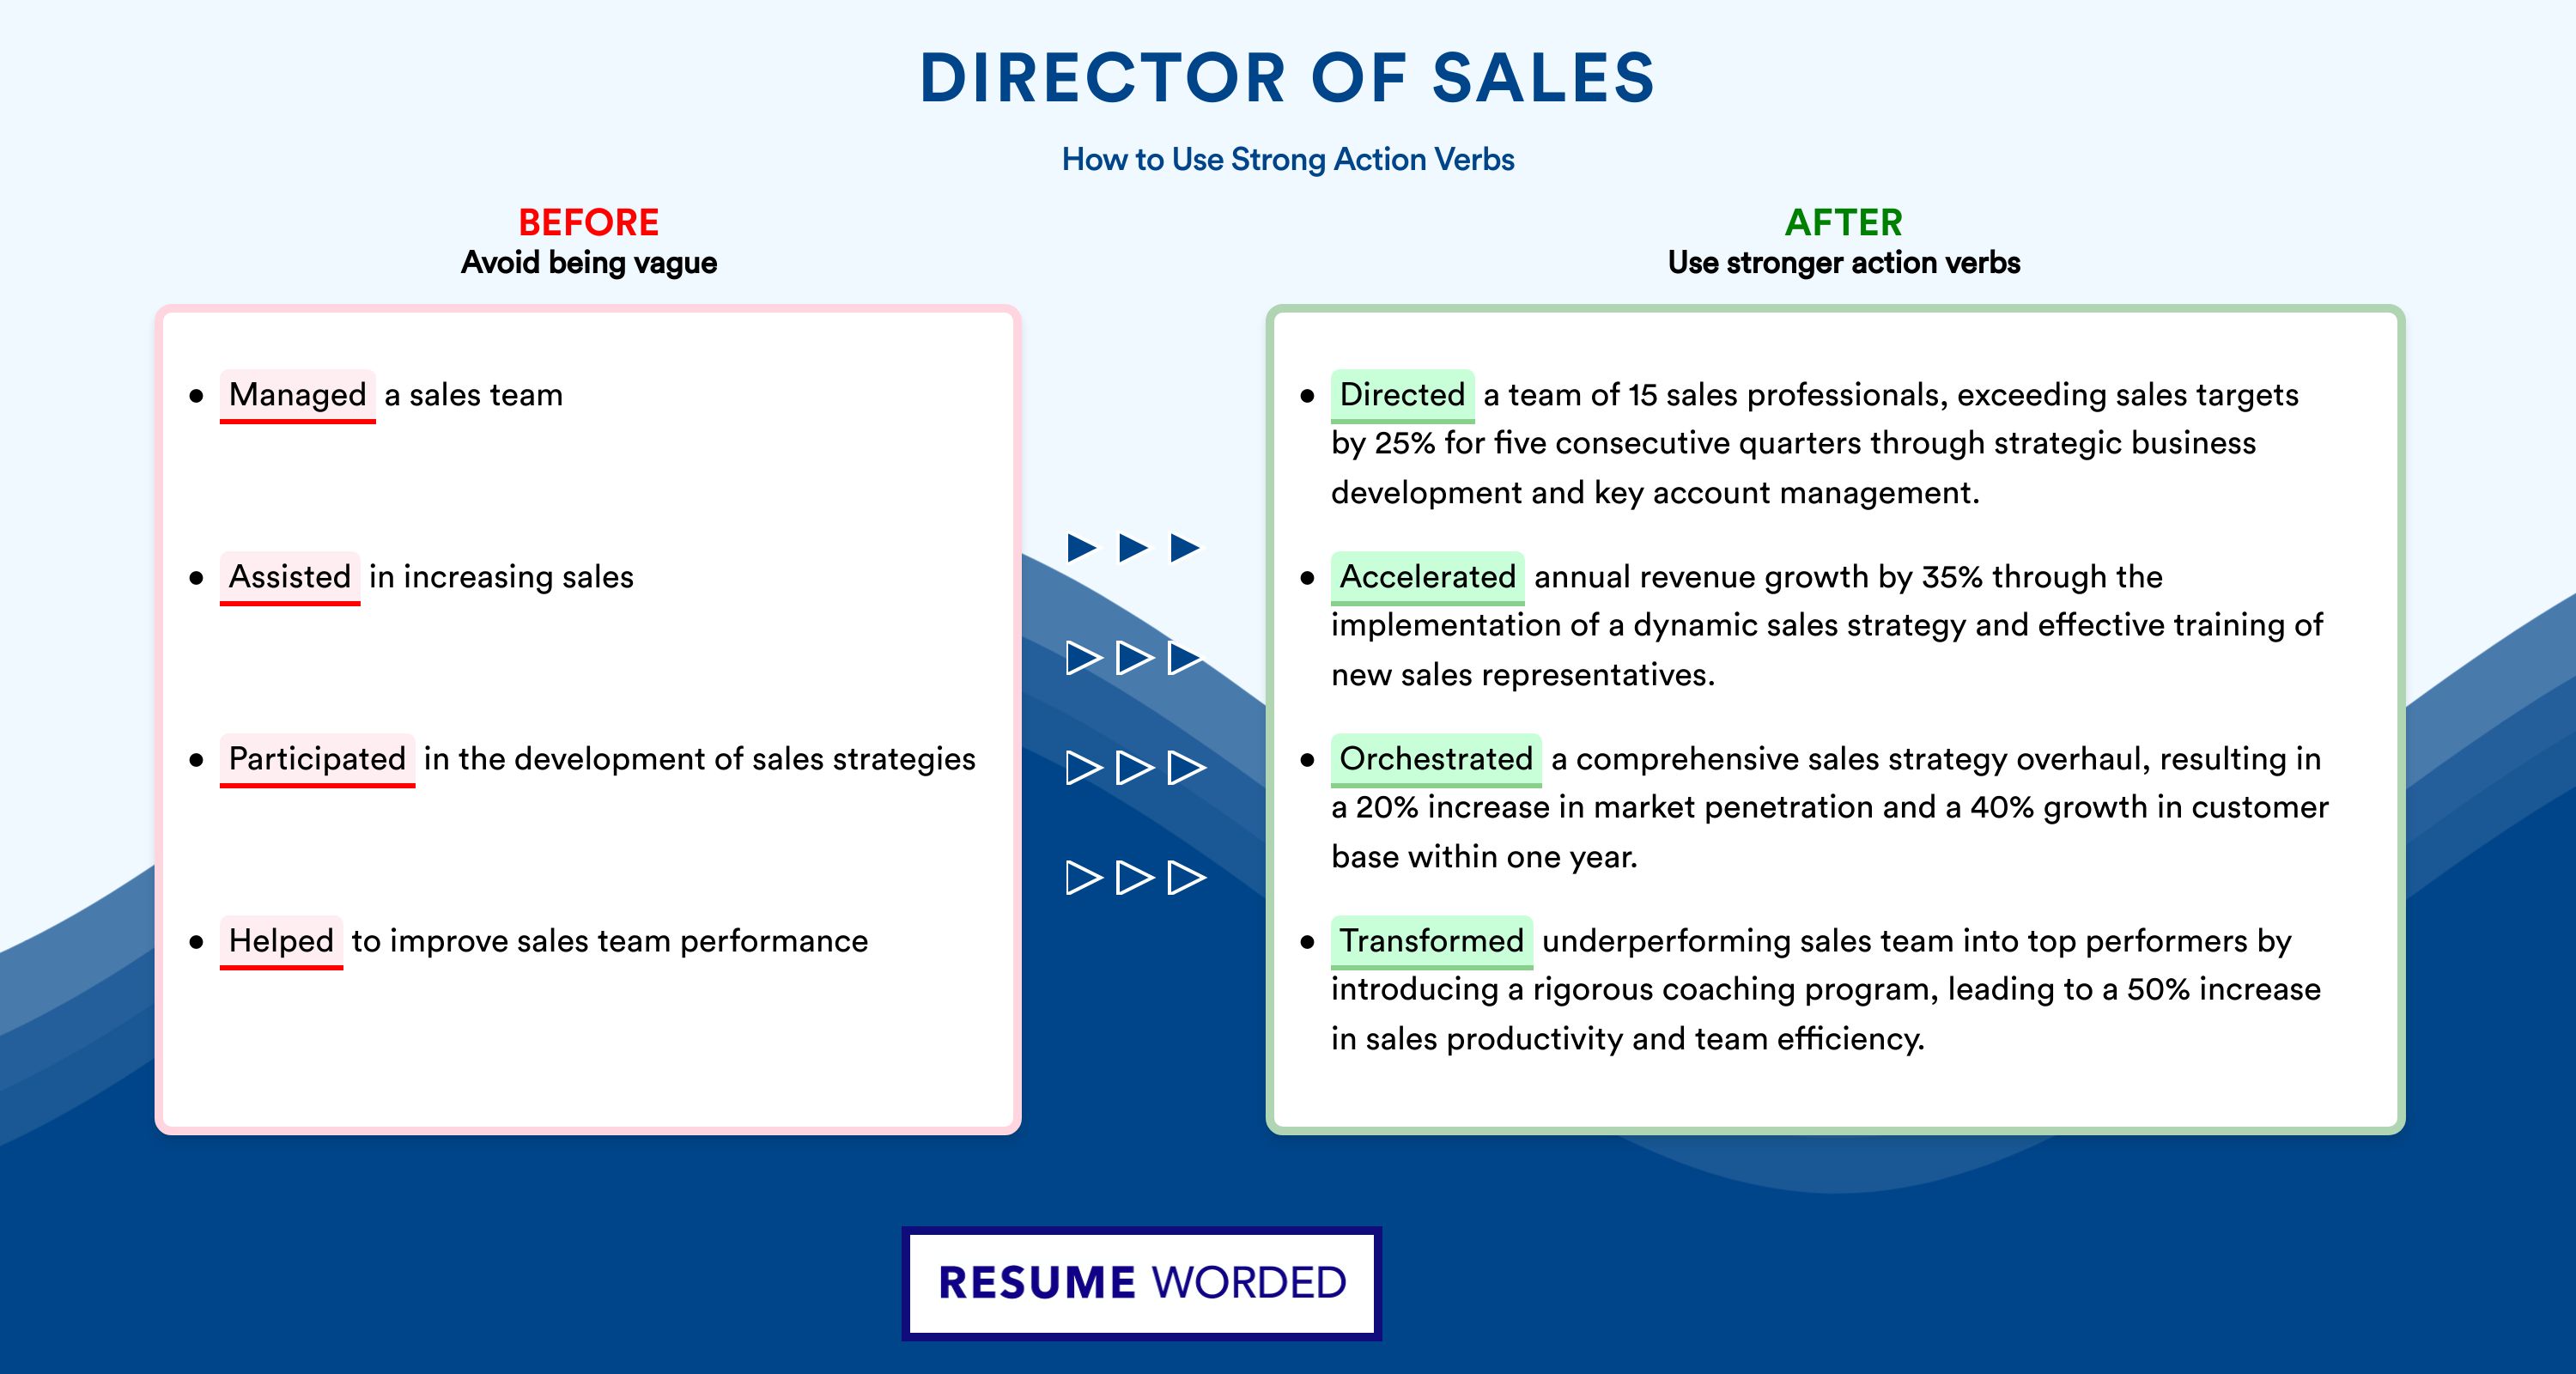 Action Verbs for Director of Sales